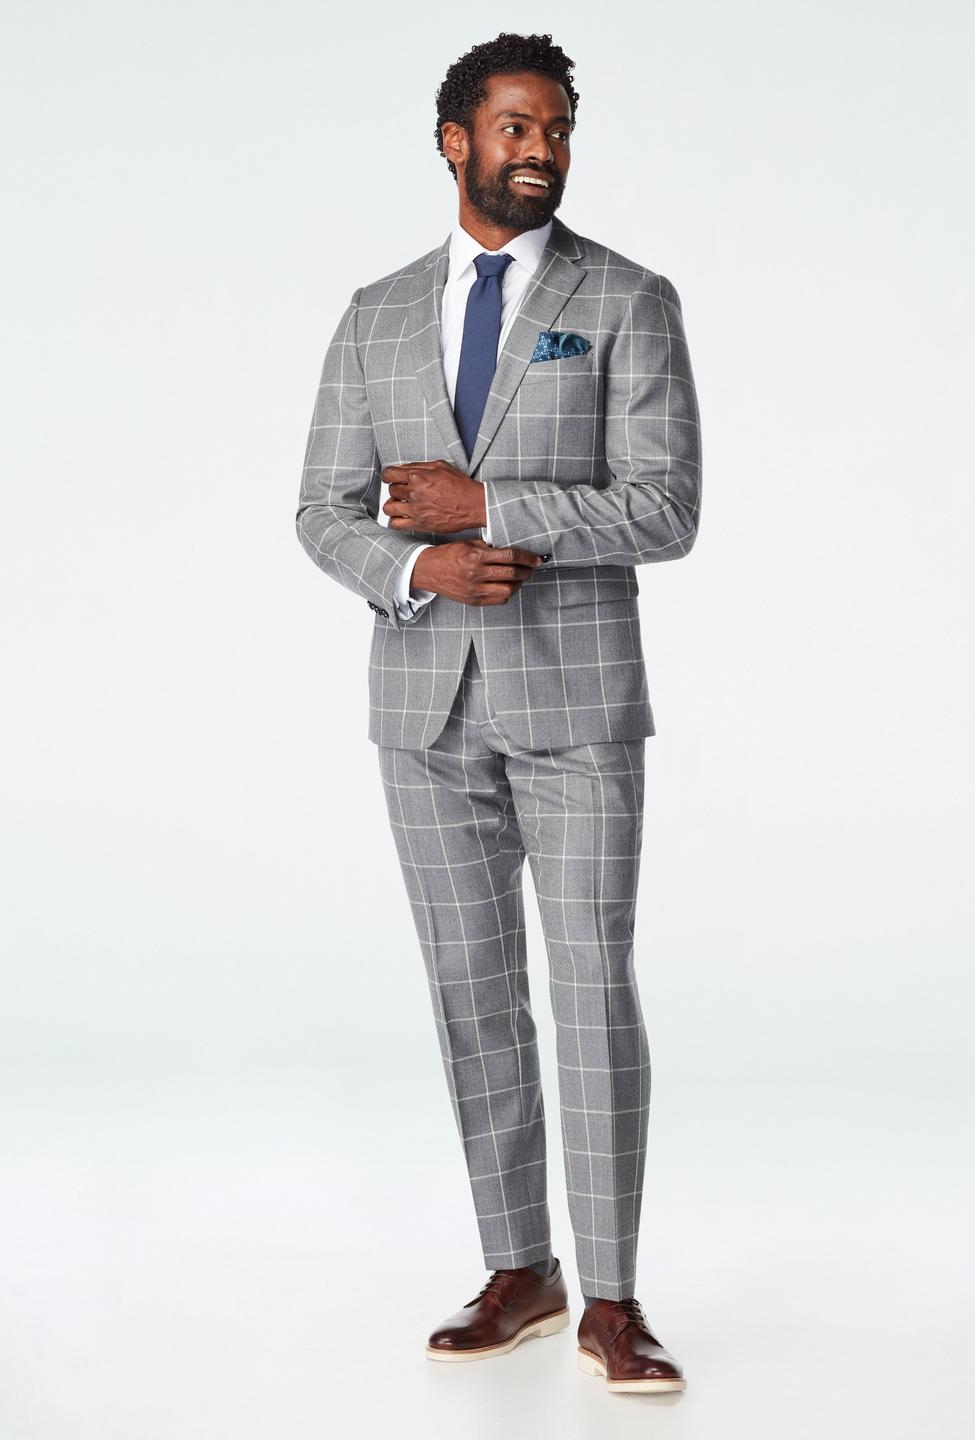 Gray suit - Durham Checked Design from Seasonal Indochino Collection